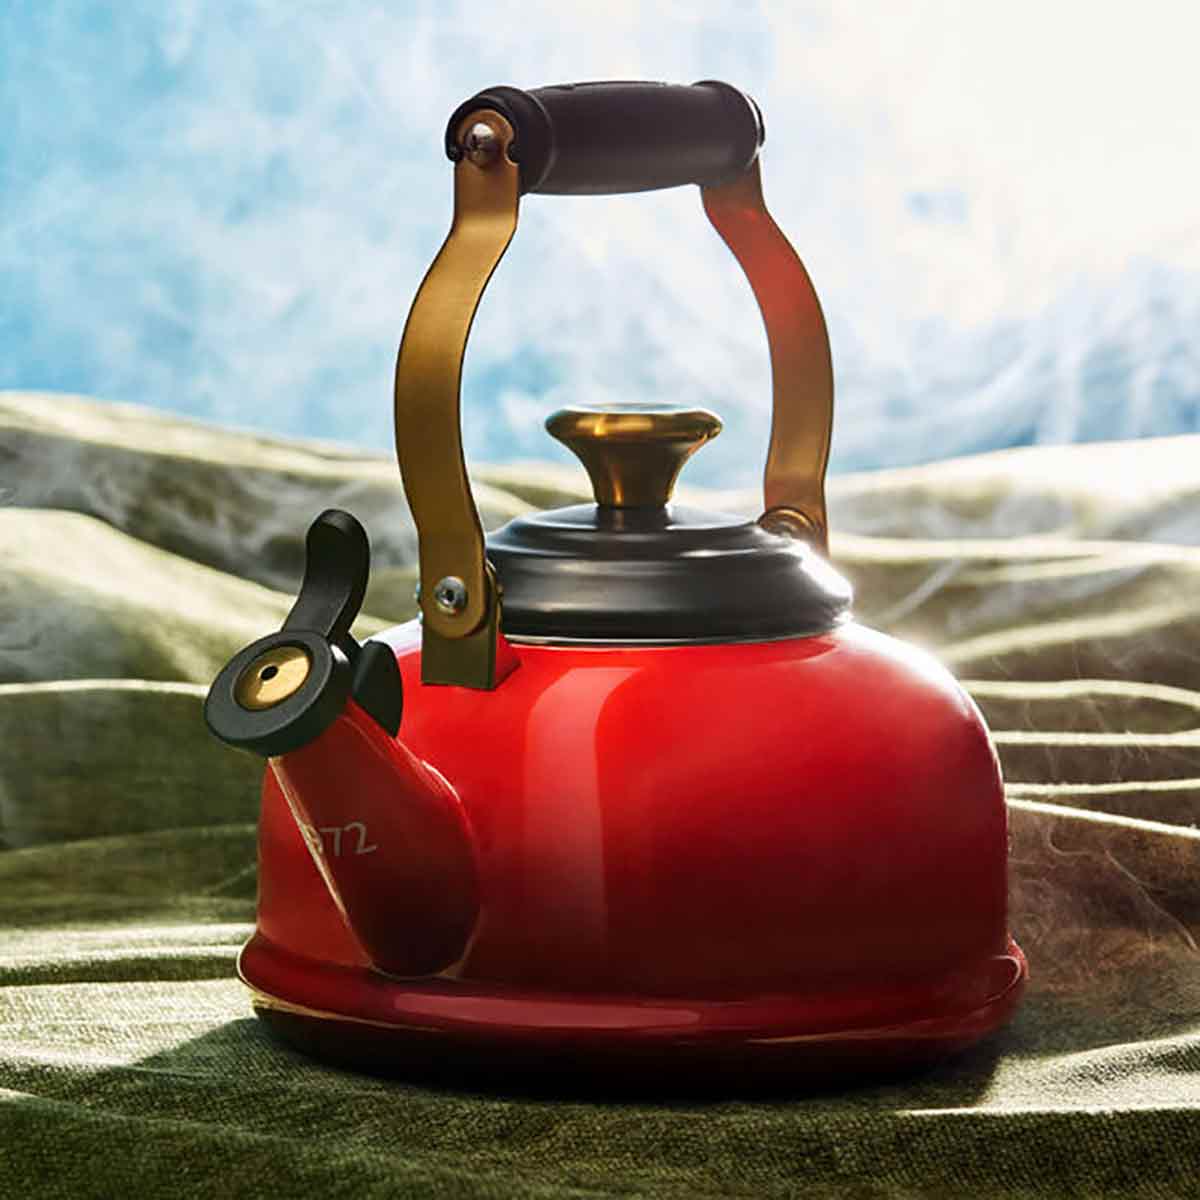 A red Hogwarts' Express tea kettle by Le Creuset